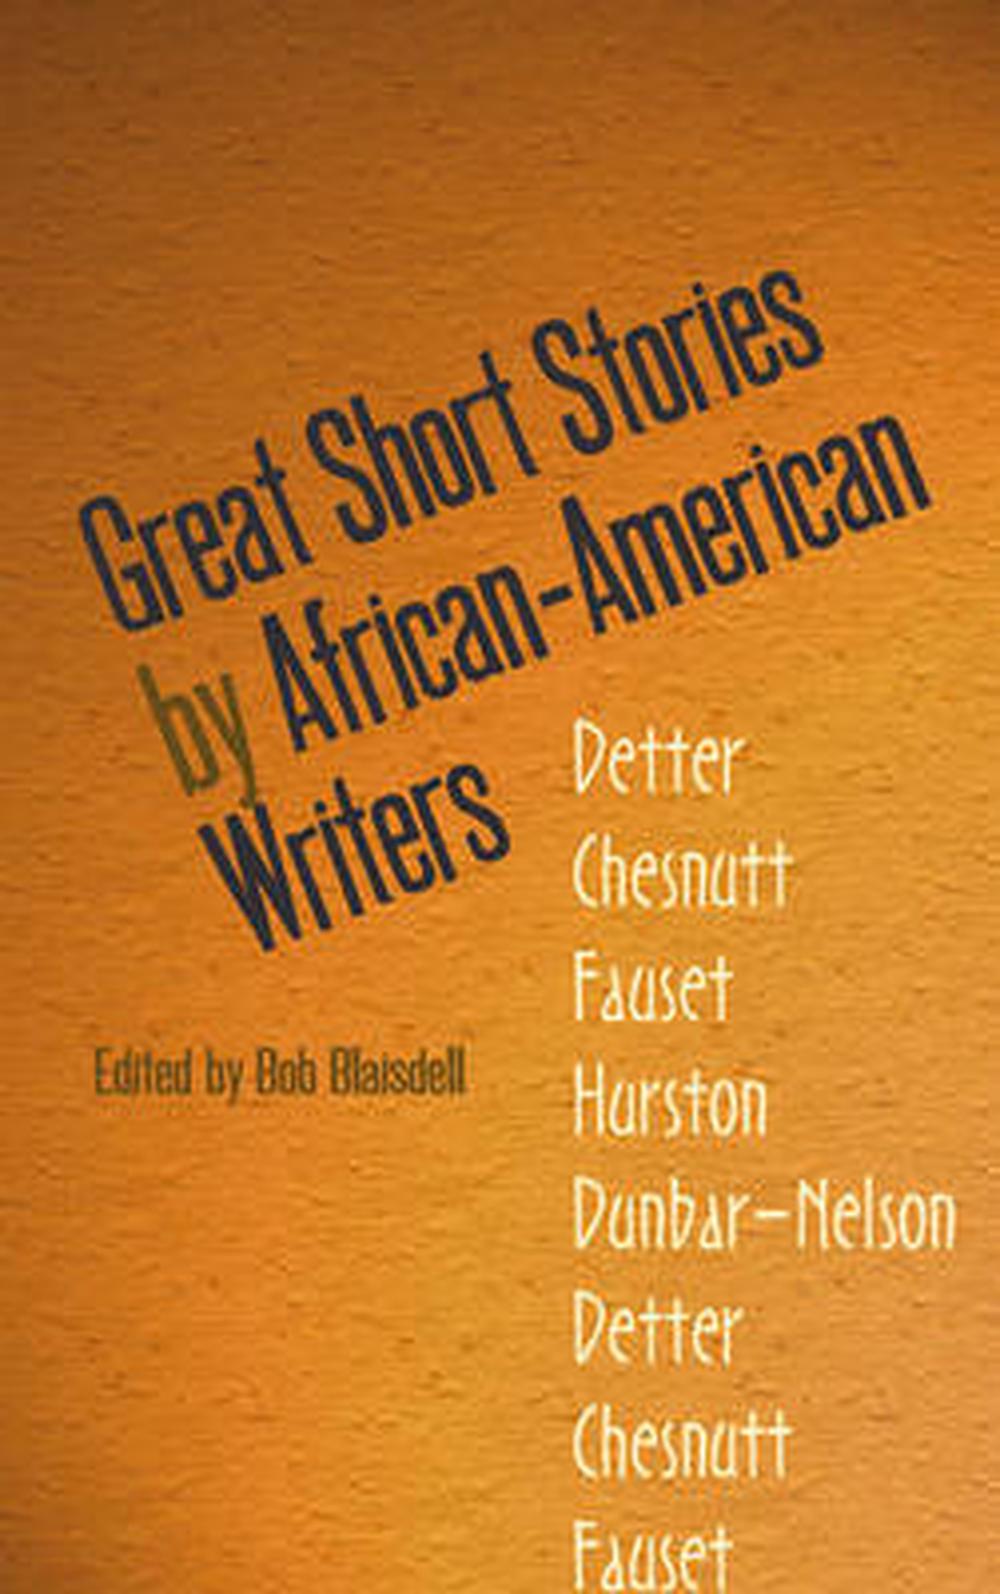 great-short-stories-by-african-american-writers-by-bob-blaisdell